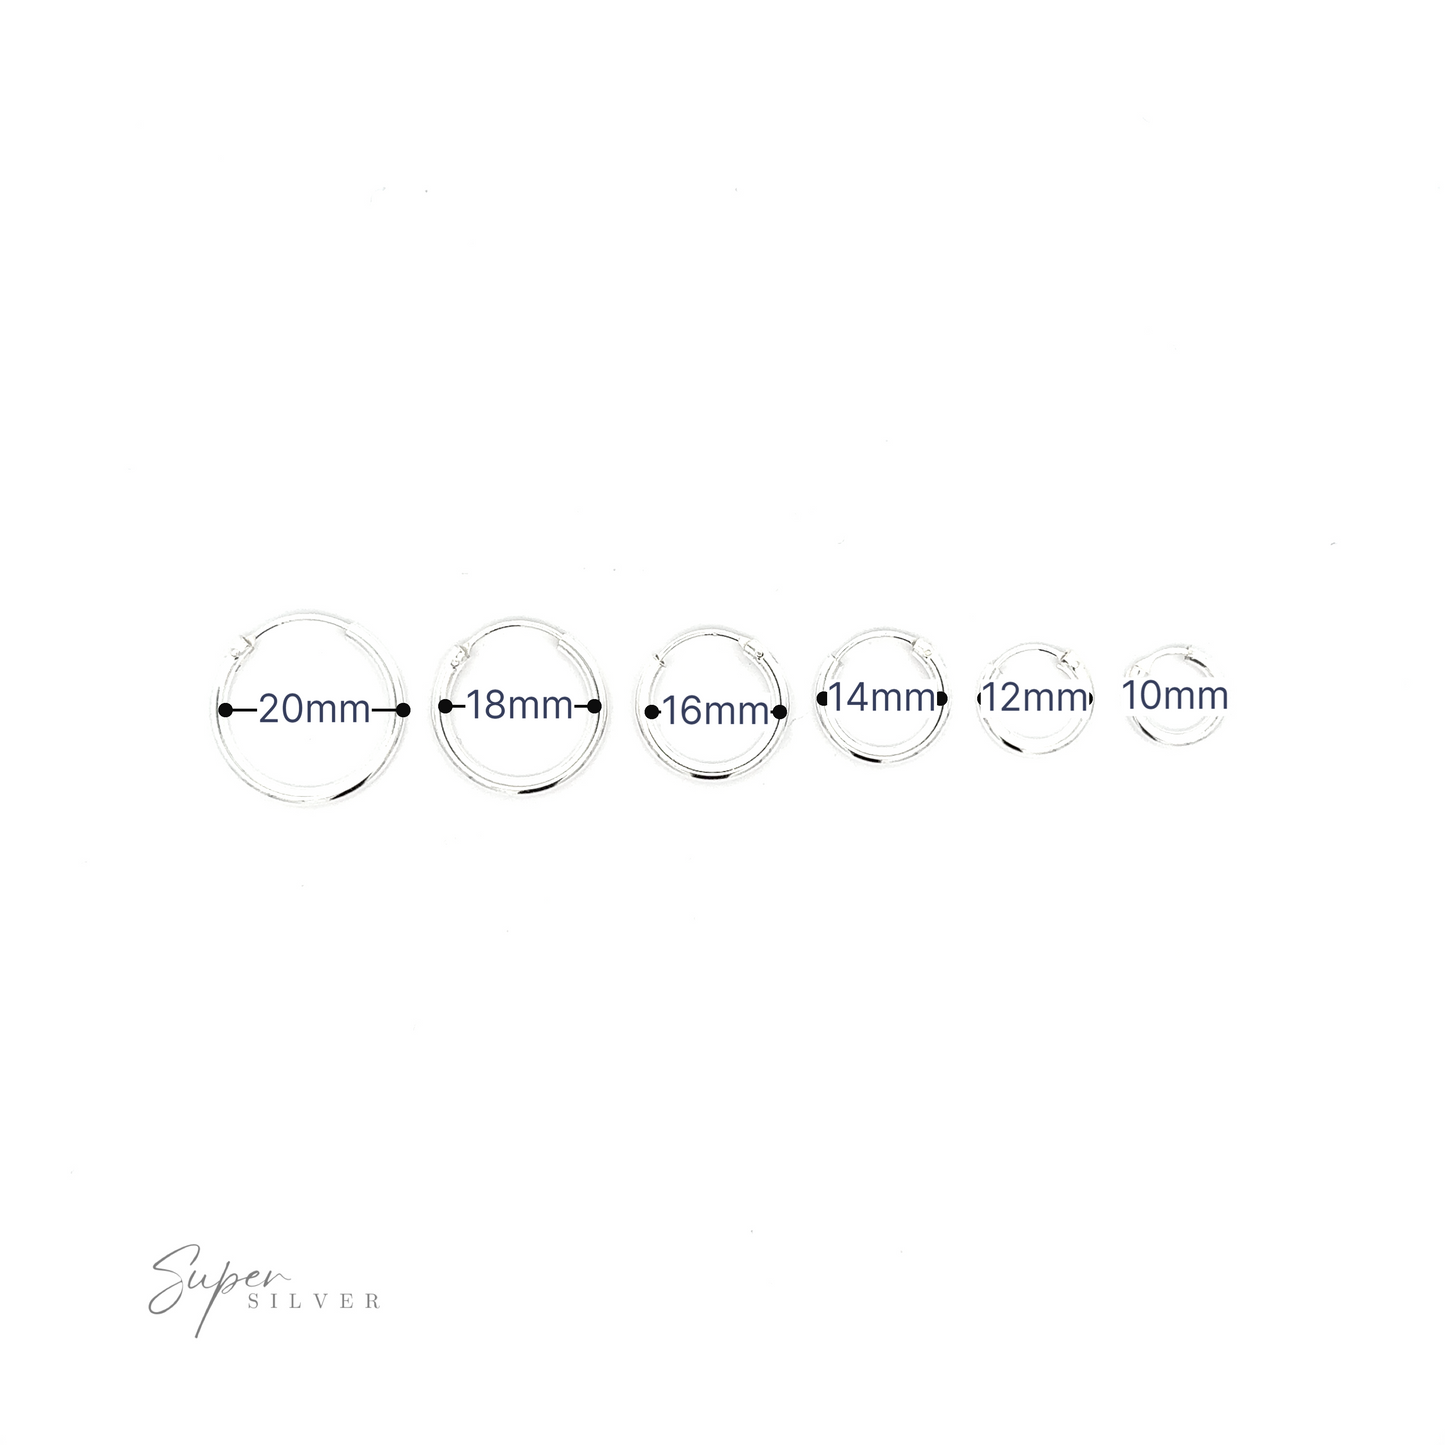 A versatile drawing showcasing the different sizes of 2mm Infinity Hoops with a minimalist flair.